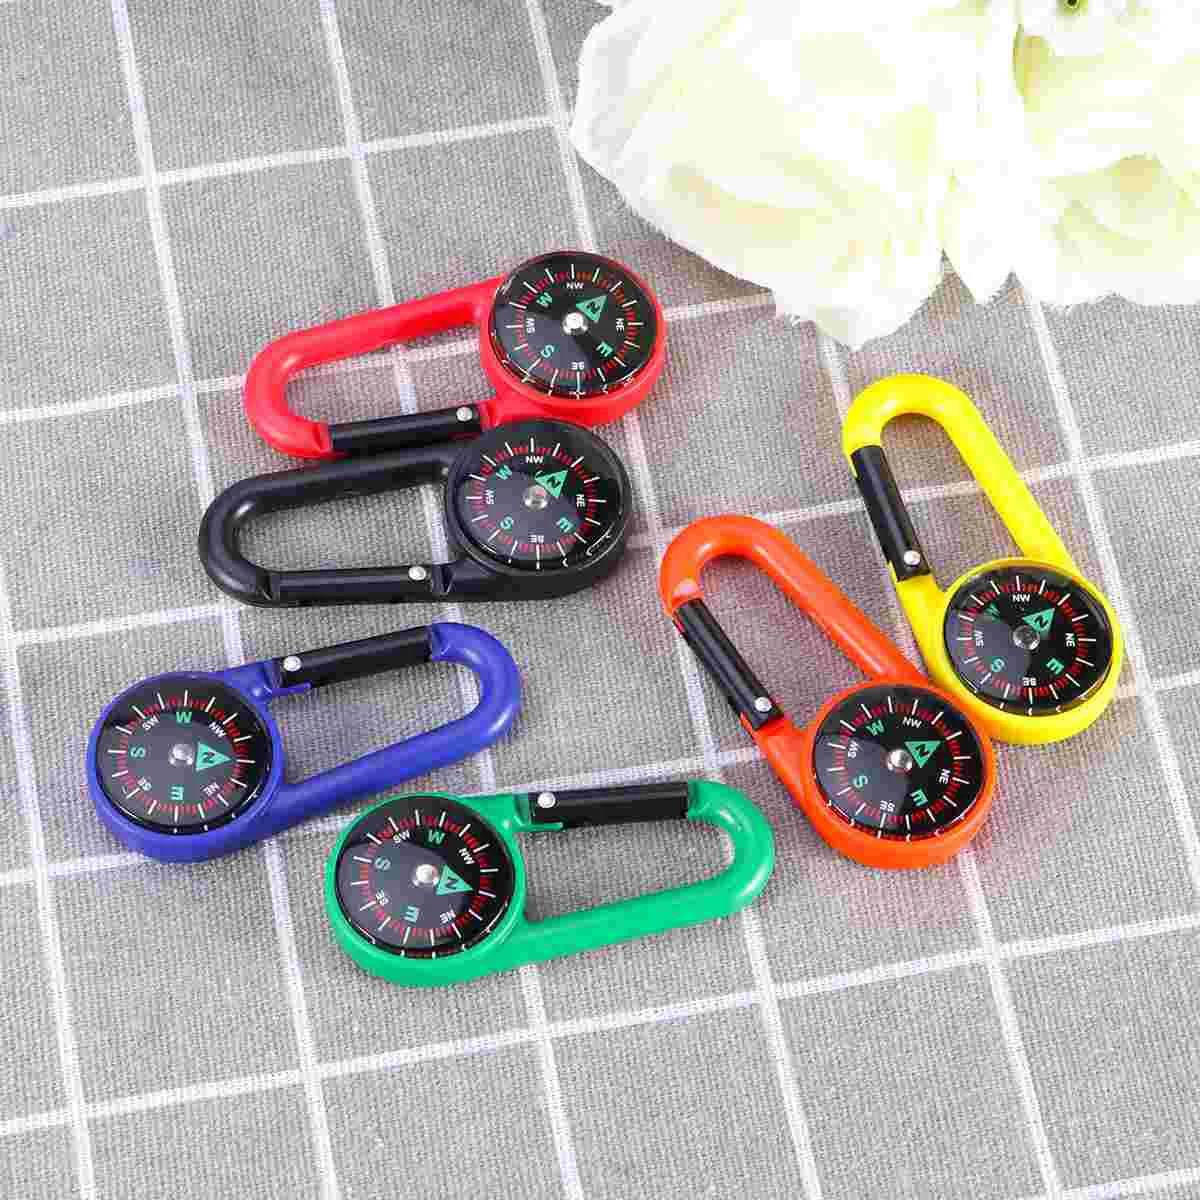 

12 Carabiner Compass Compass Carabiner Clip for Outdoor Hiking Camping Climbing Travelling ( Random Colors )